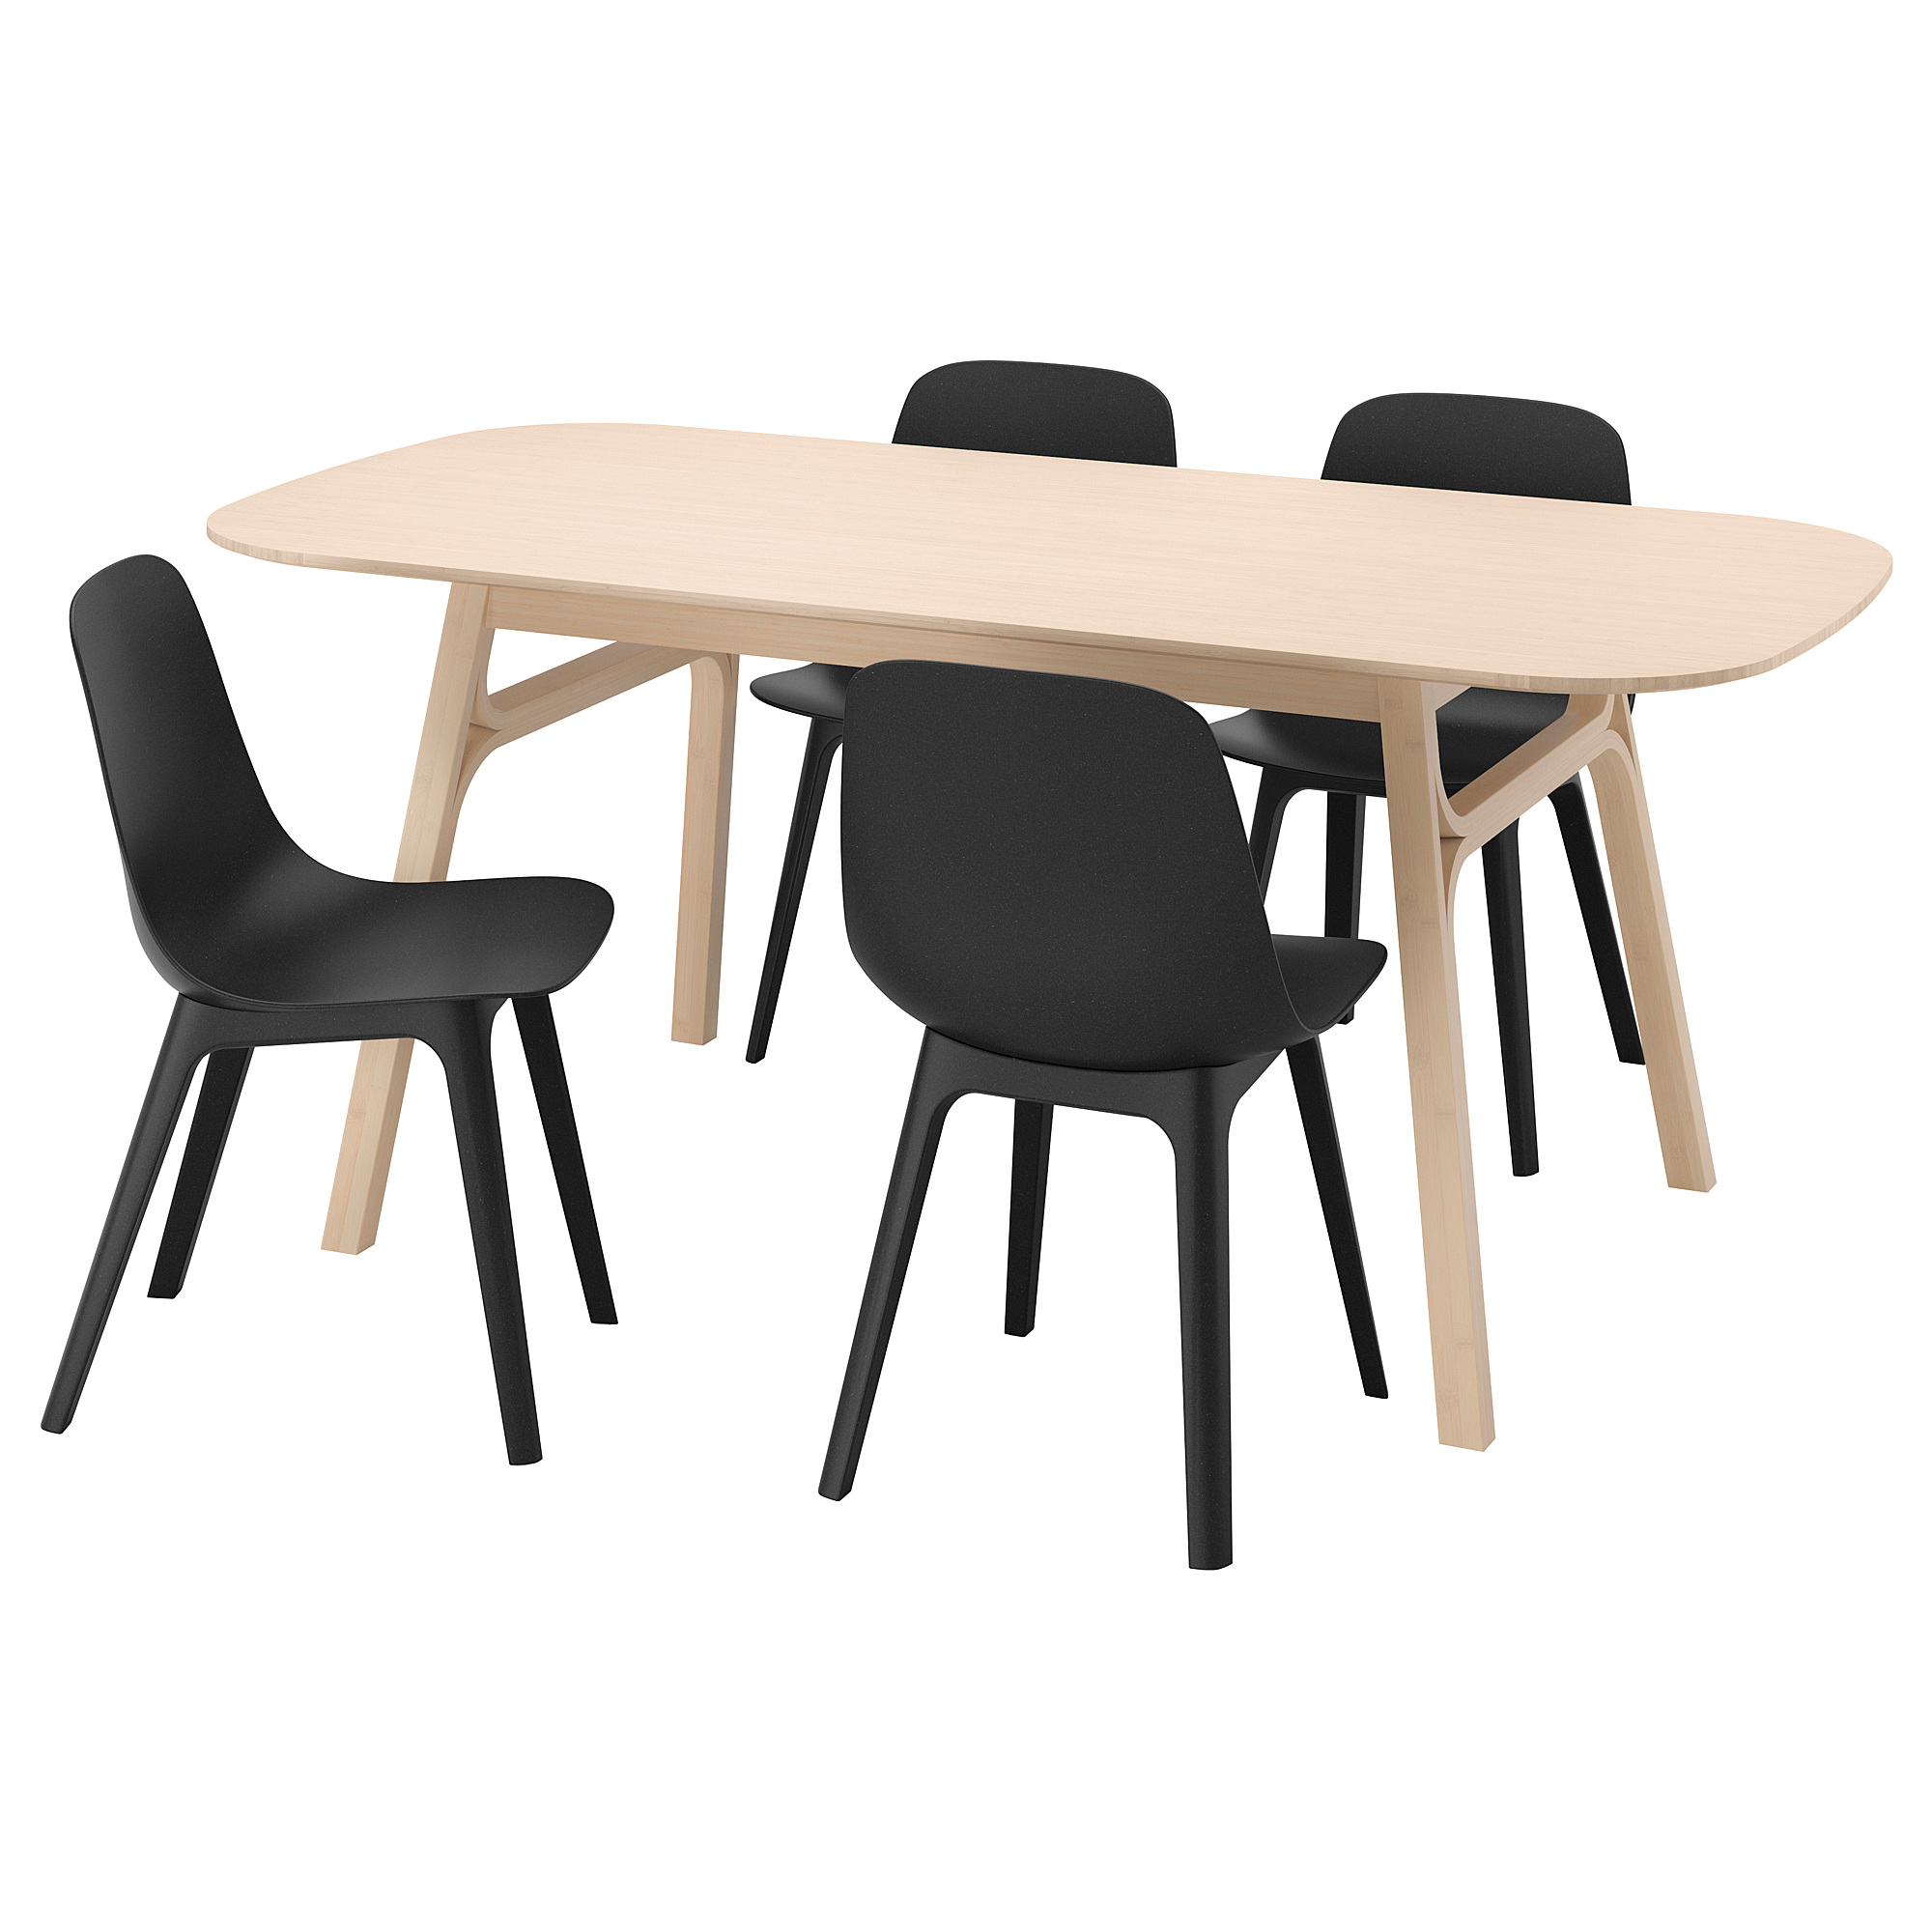 VOXLÖV/ODGER table and 4 chairs